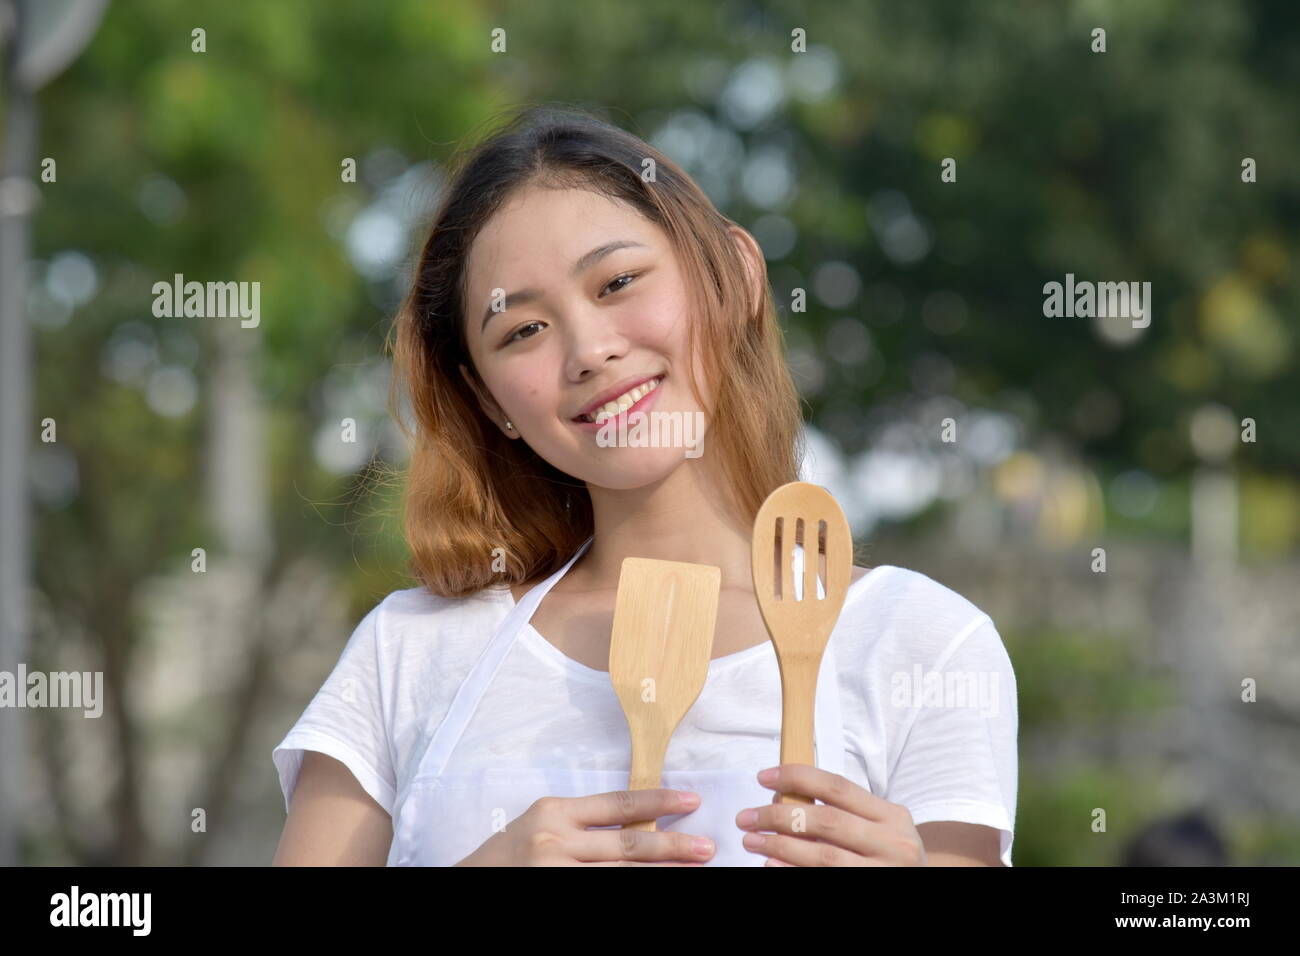 Female Cook And Happiness With Utensils Stock Photo